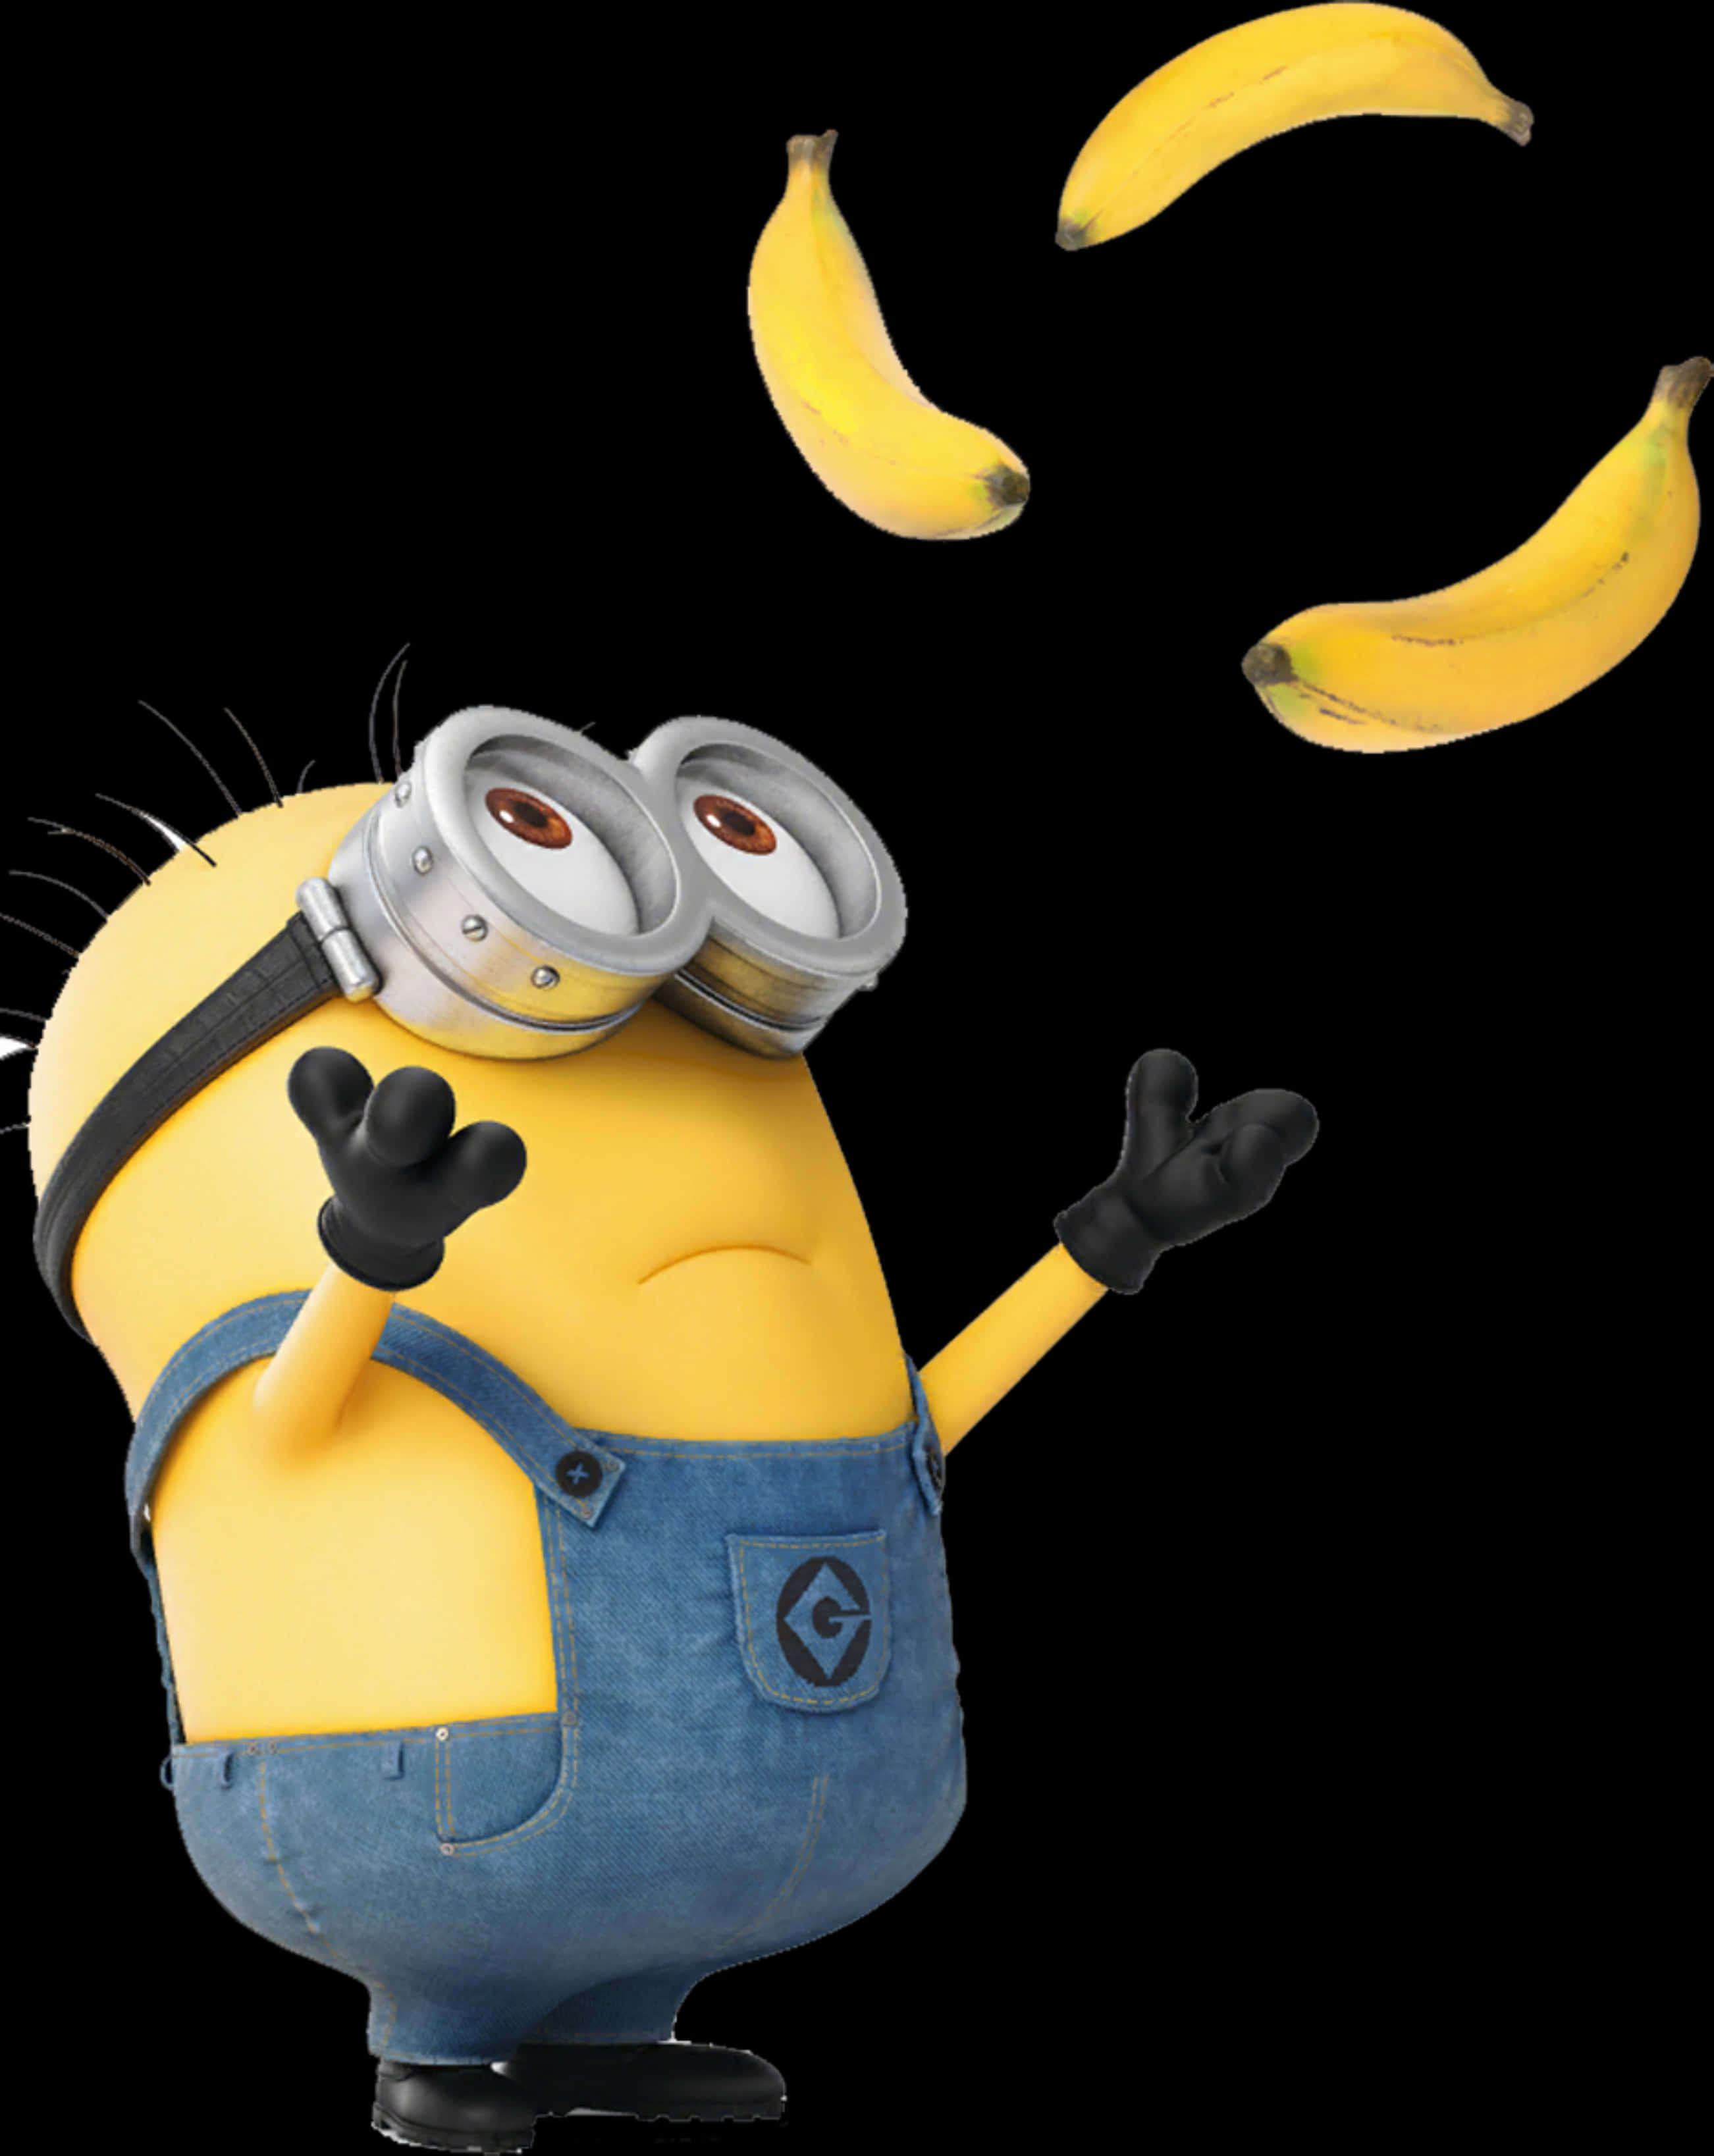 A Cartoon Character With Glasses And A Bunch Of Bananas